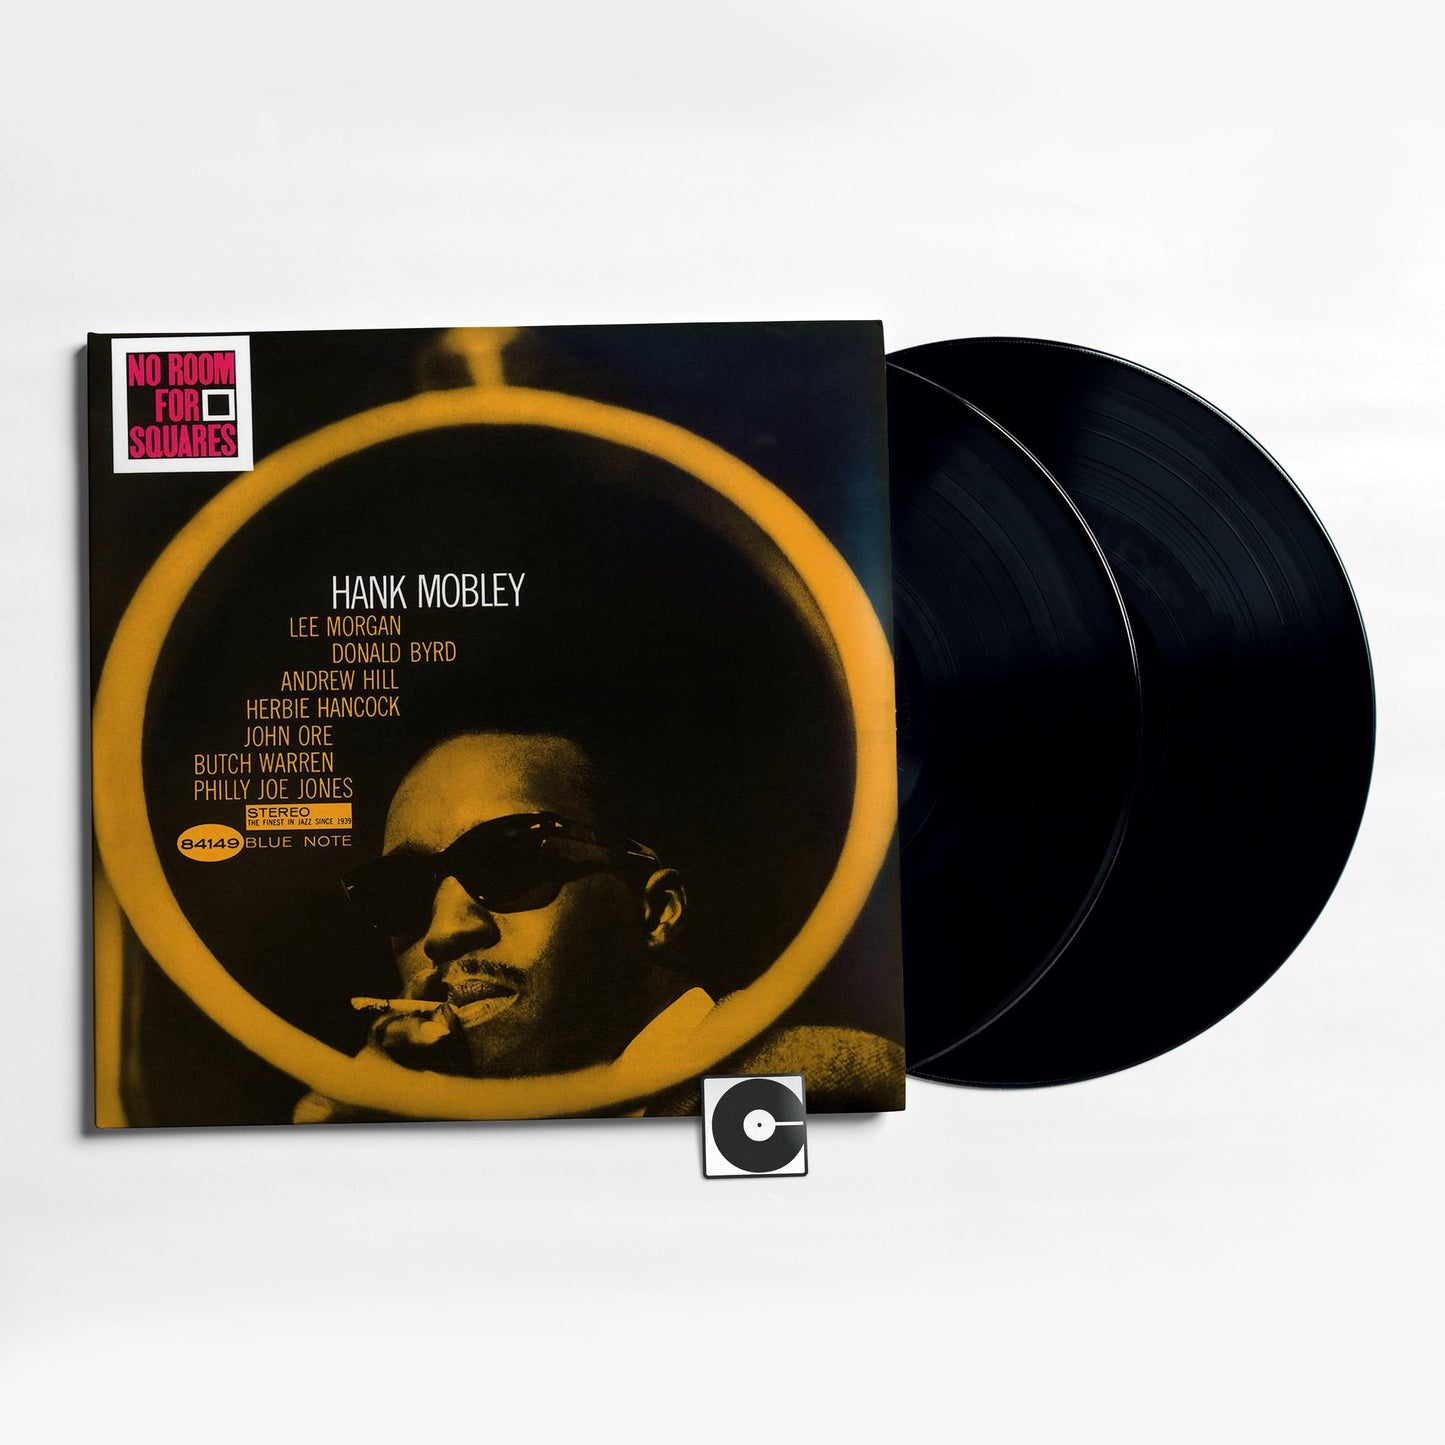 Hank Mobley - "No Room For Squares" Analogue Productions